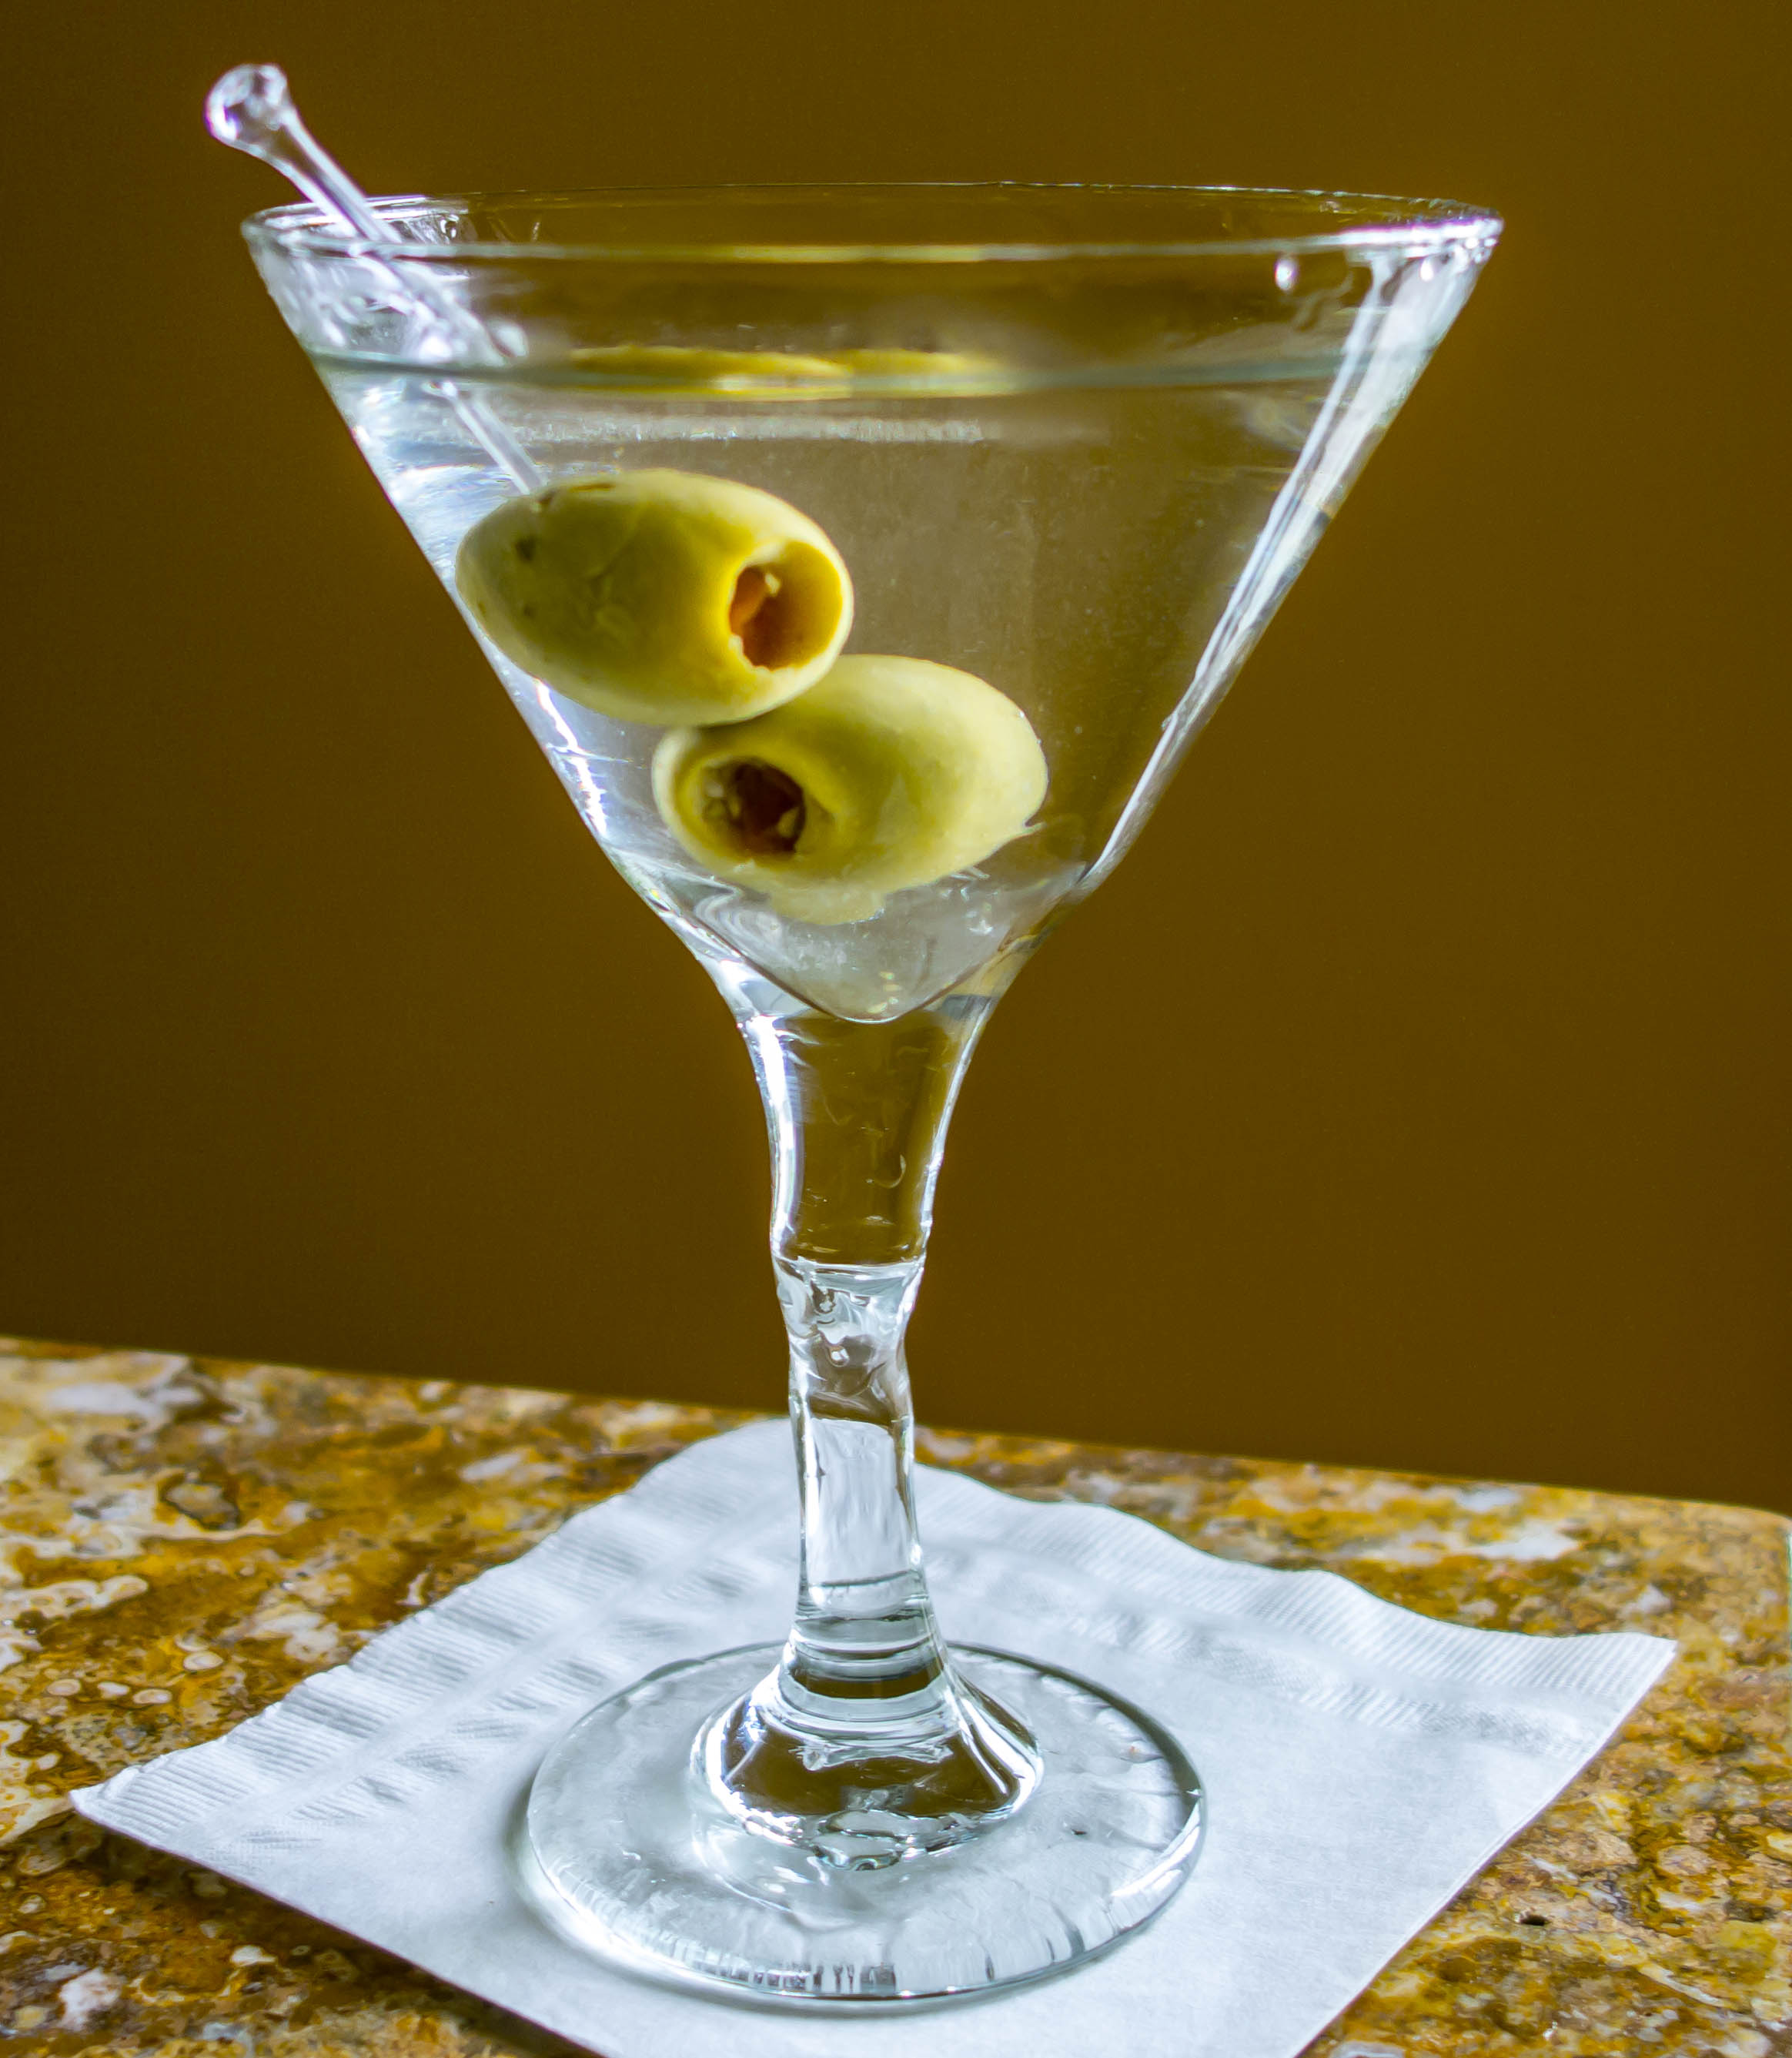 https://realfoodfinds.com/wp-content/uploads/2013/08/Classic-Martini-4.jpg